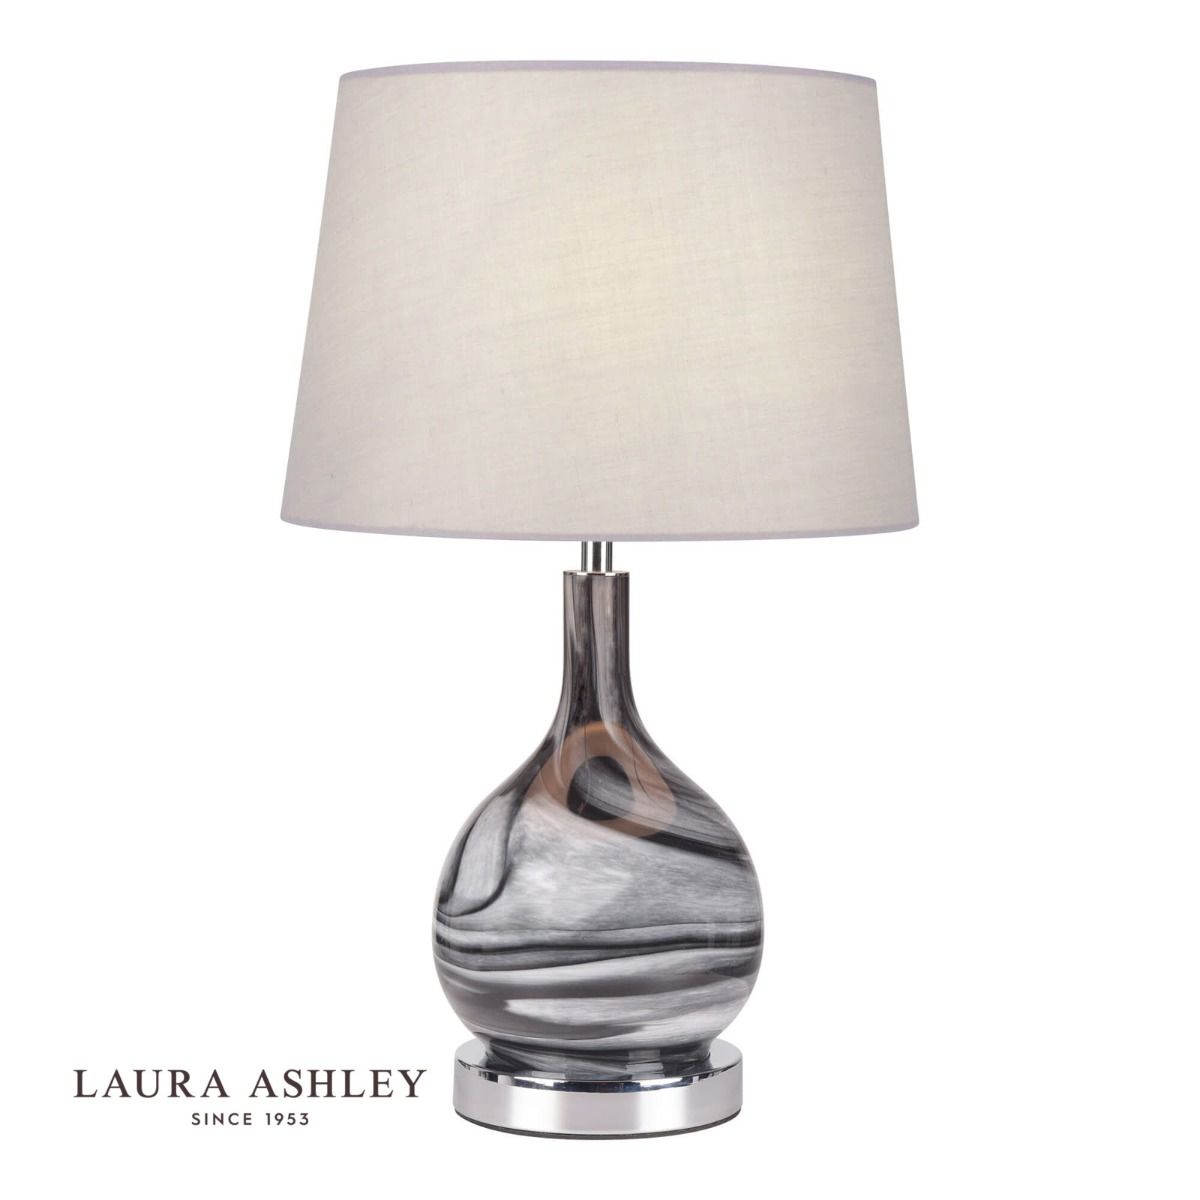 Swirl Table Lamp Grey Glass With Shade, Table Lamp With Glass Shade Uk